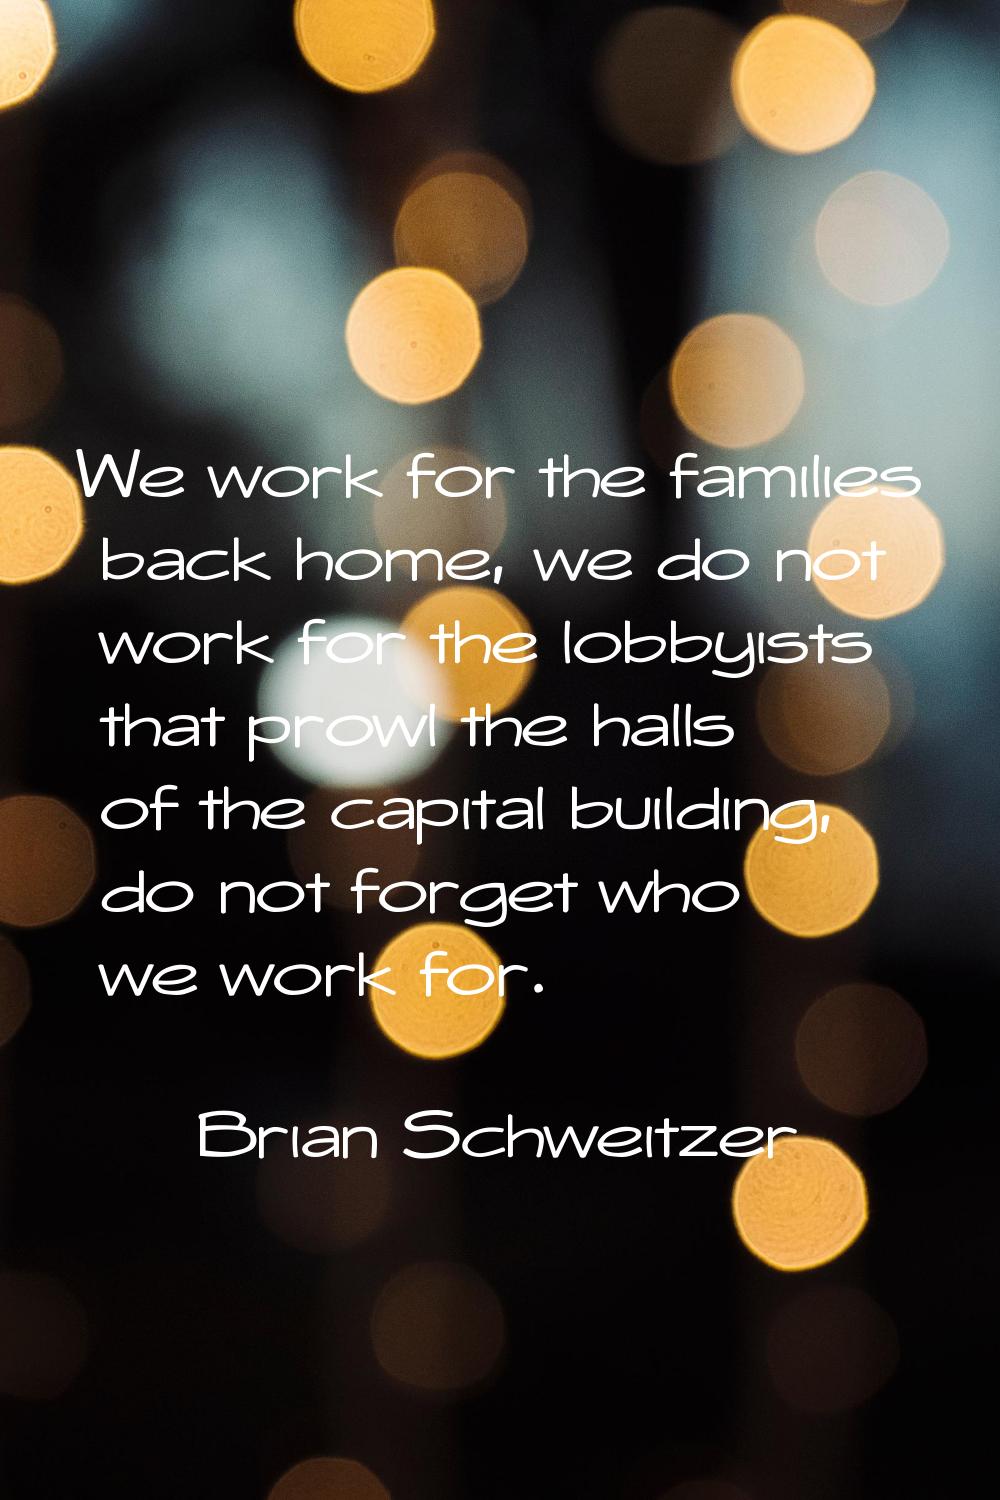 We work for the families back home, we do not work for the lobbyists that prowl the halls of the ca